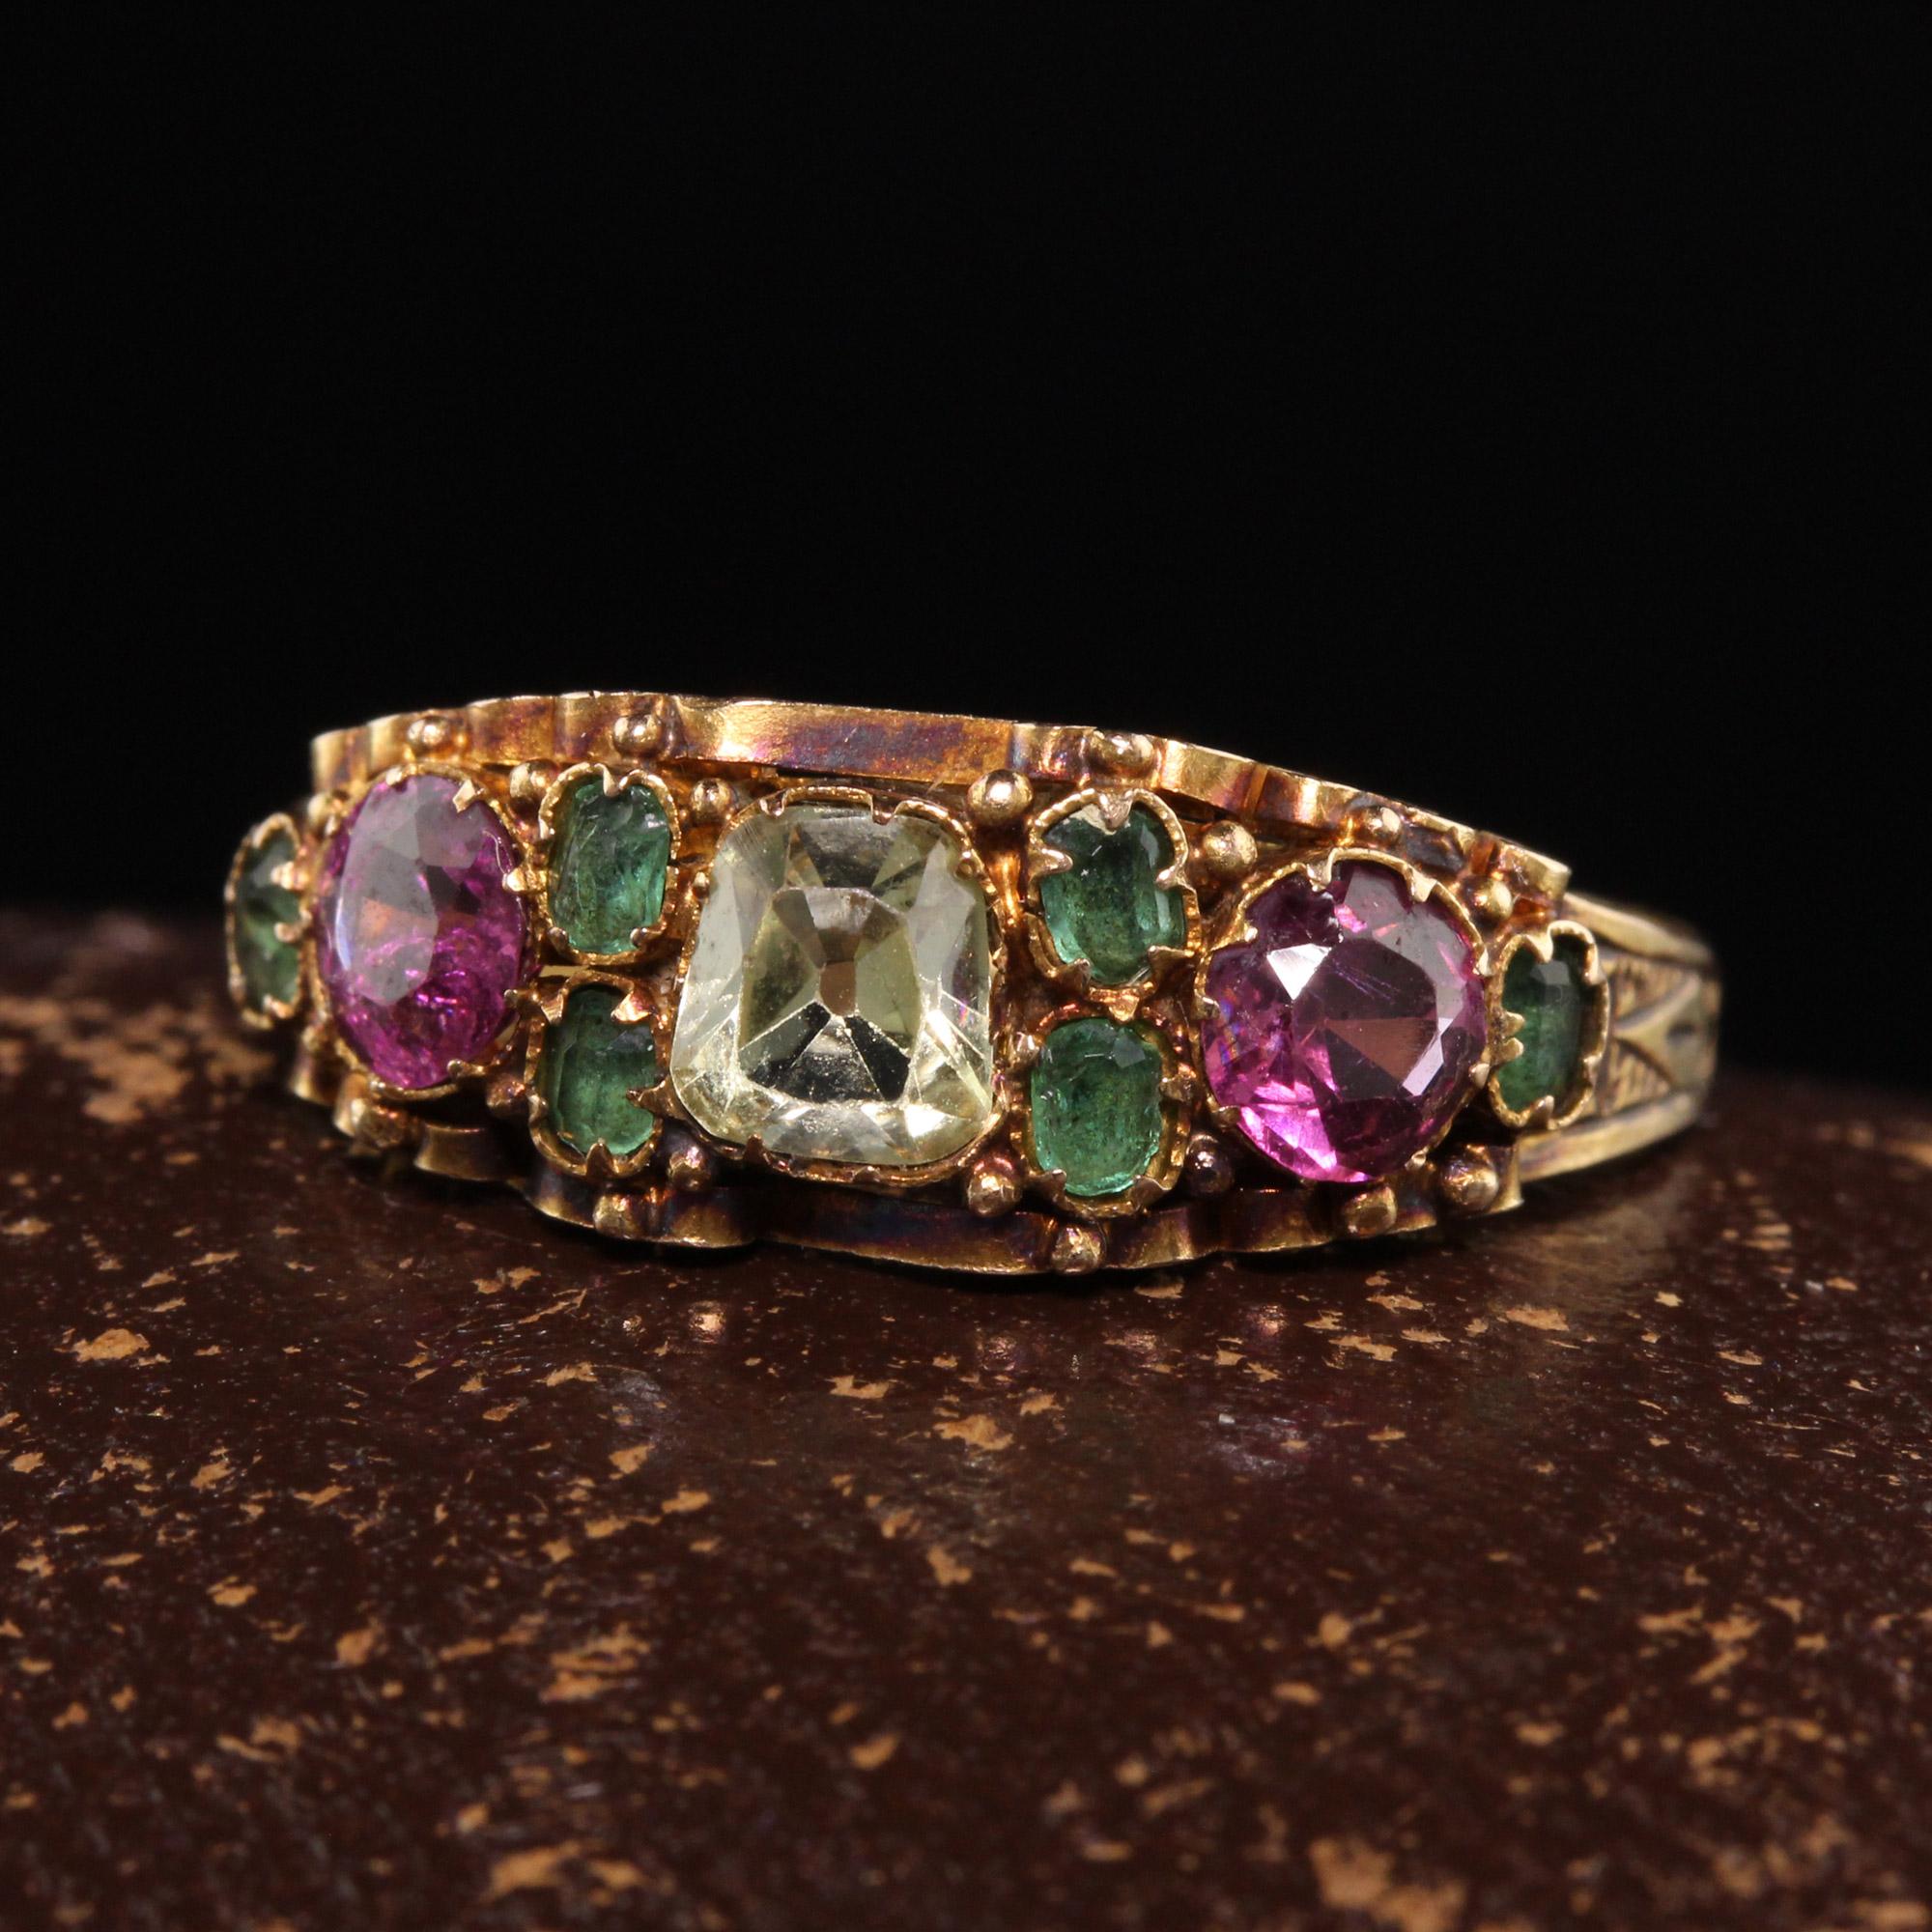 Beautiful Antique Victorian 15K Yellow Gold Ruby Emerald and Chrysoberyl Engraved Ring. This amazing Victorian ring has rubies, emeralds and a cushion chrysoberyl in the center on a pristine filigree engraved victorian mounting. The ring is in